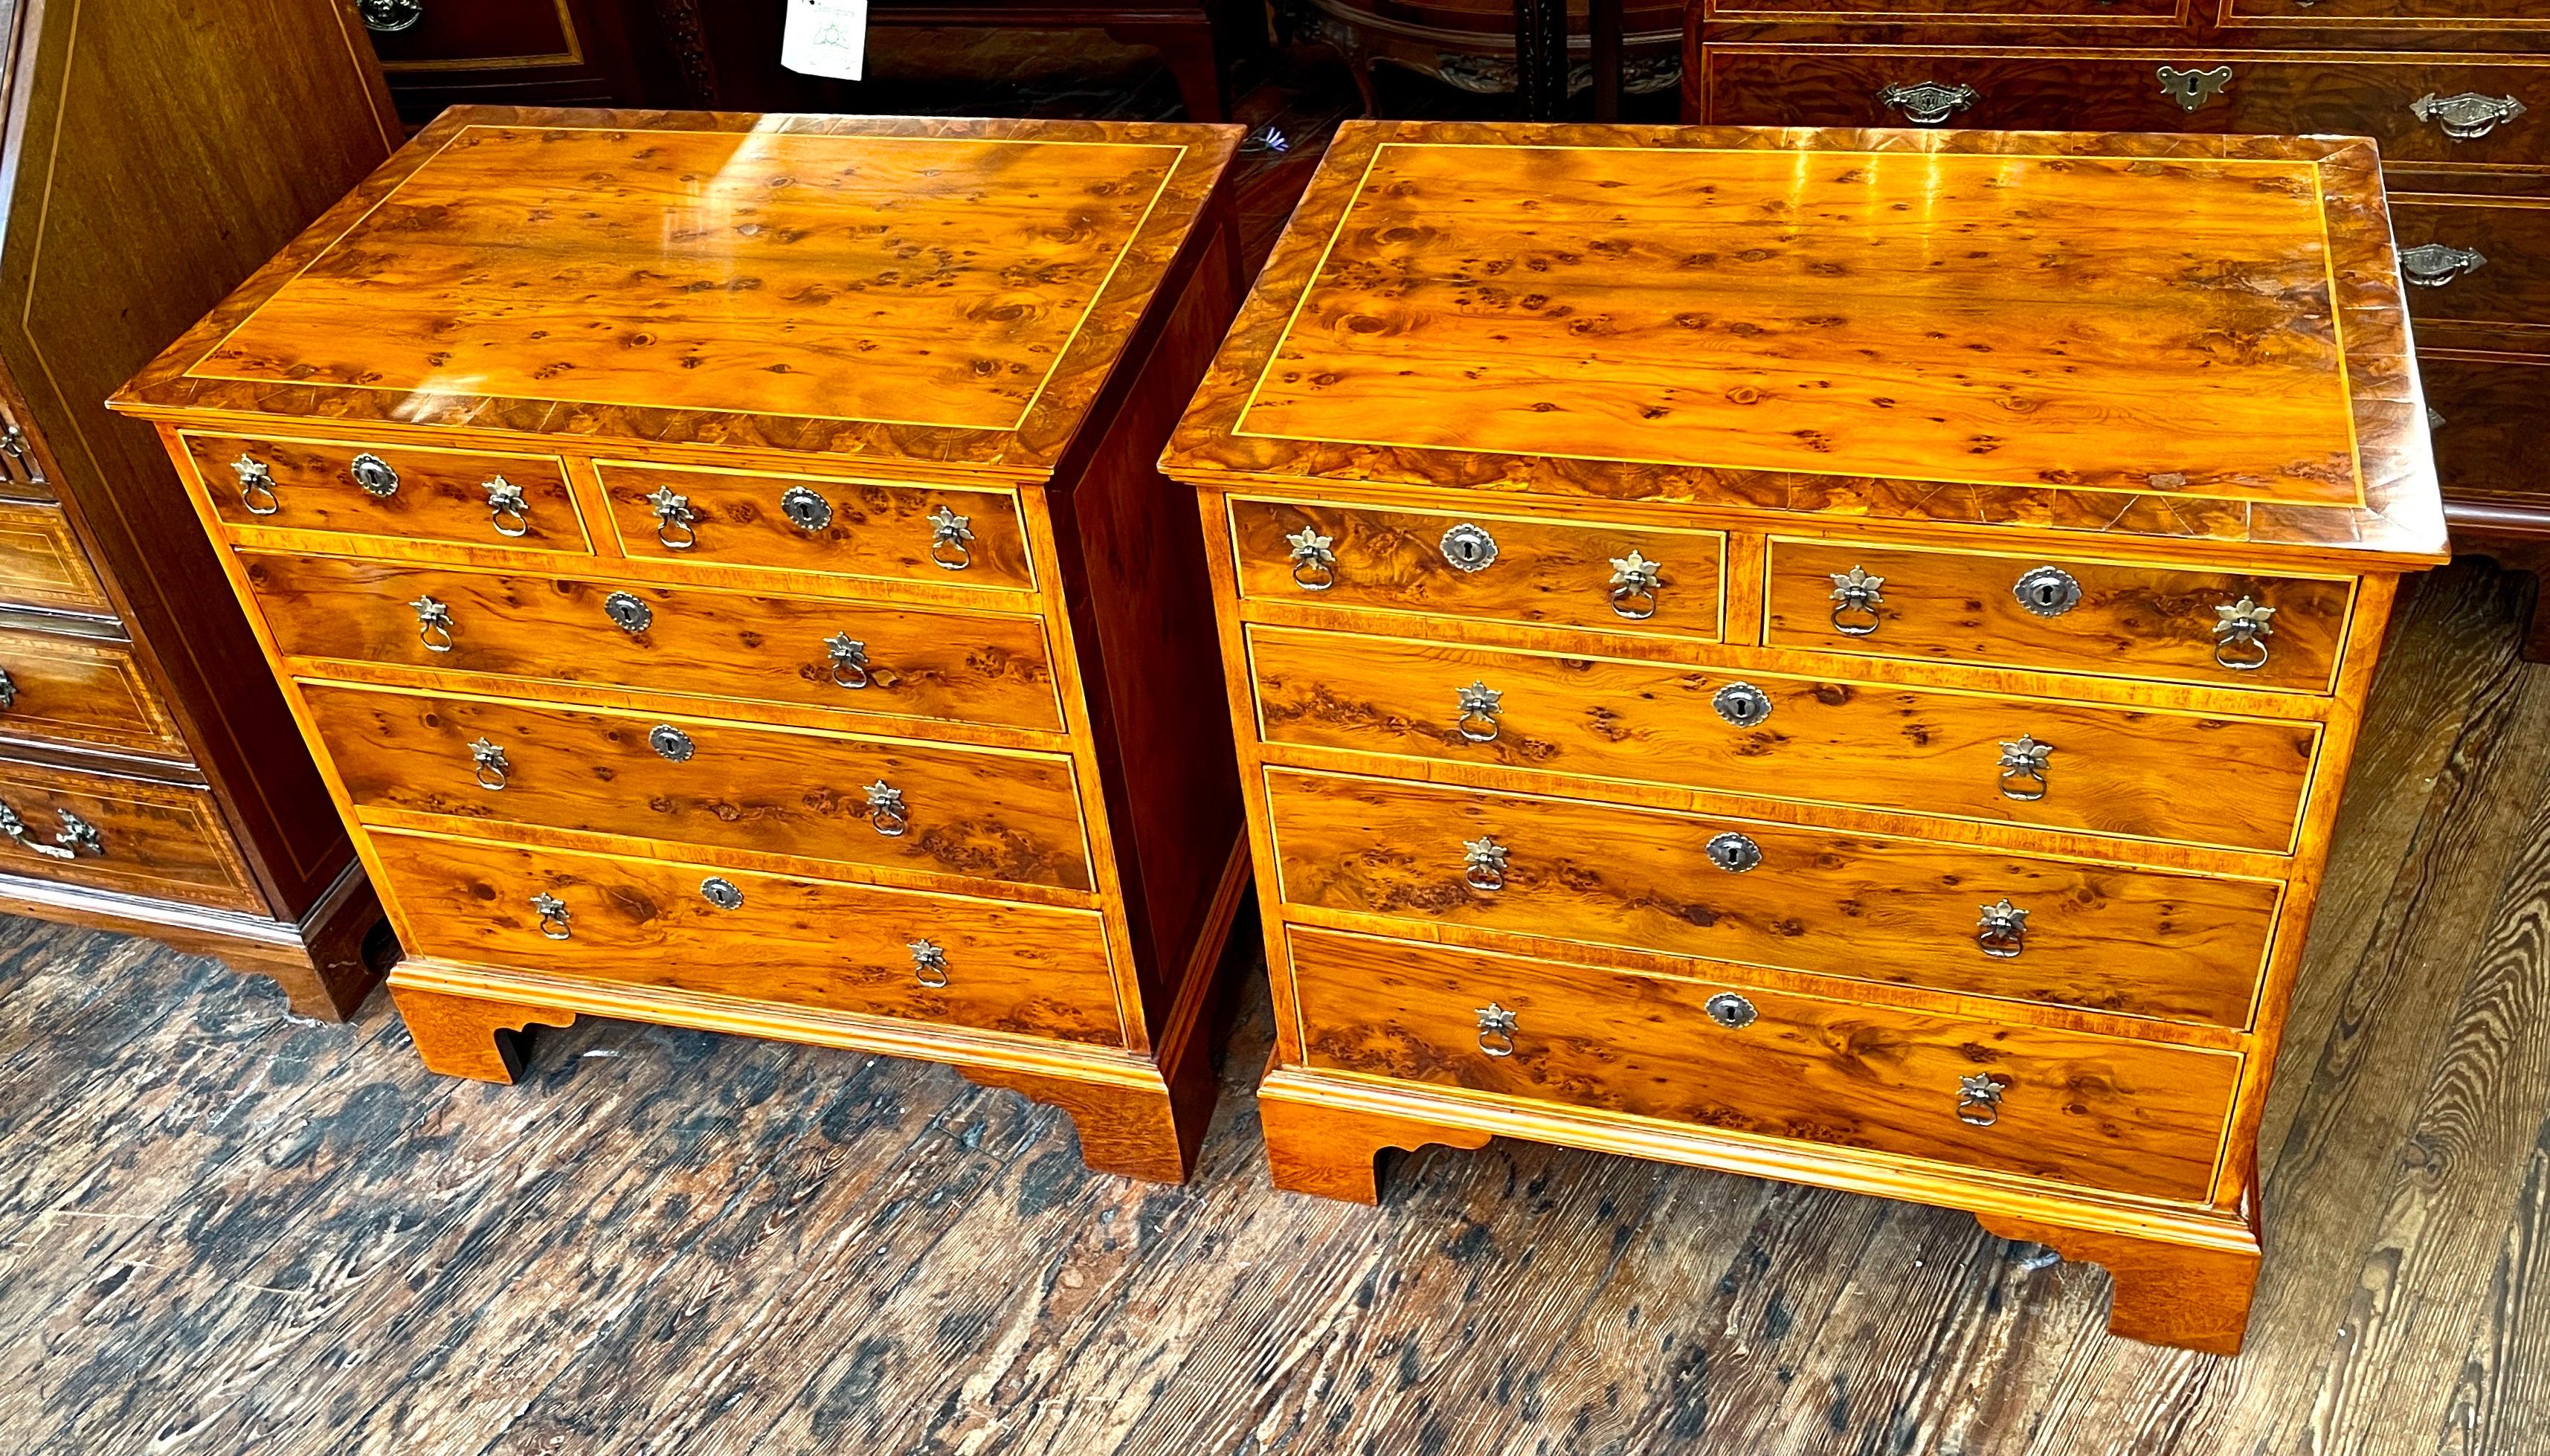 This extraordianry PAIR of Antique English inlaid and crossbanded Yew wood Bachelor's Chests were made during the Queen Anne Revival period of the mid-19th century in England (Circa 1850-'75).  (The originals would have been made in the early 18th